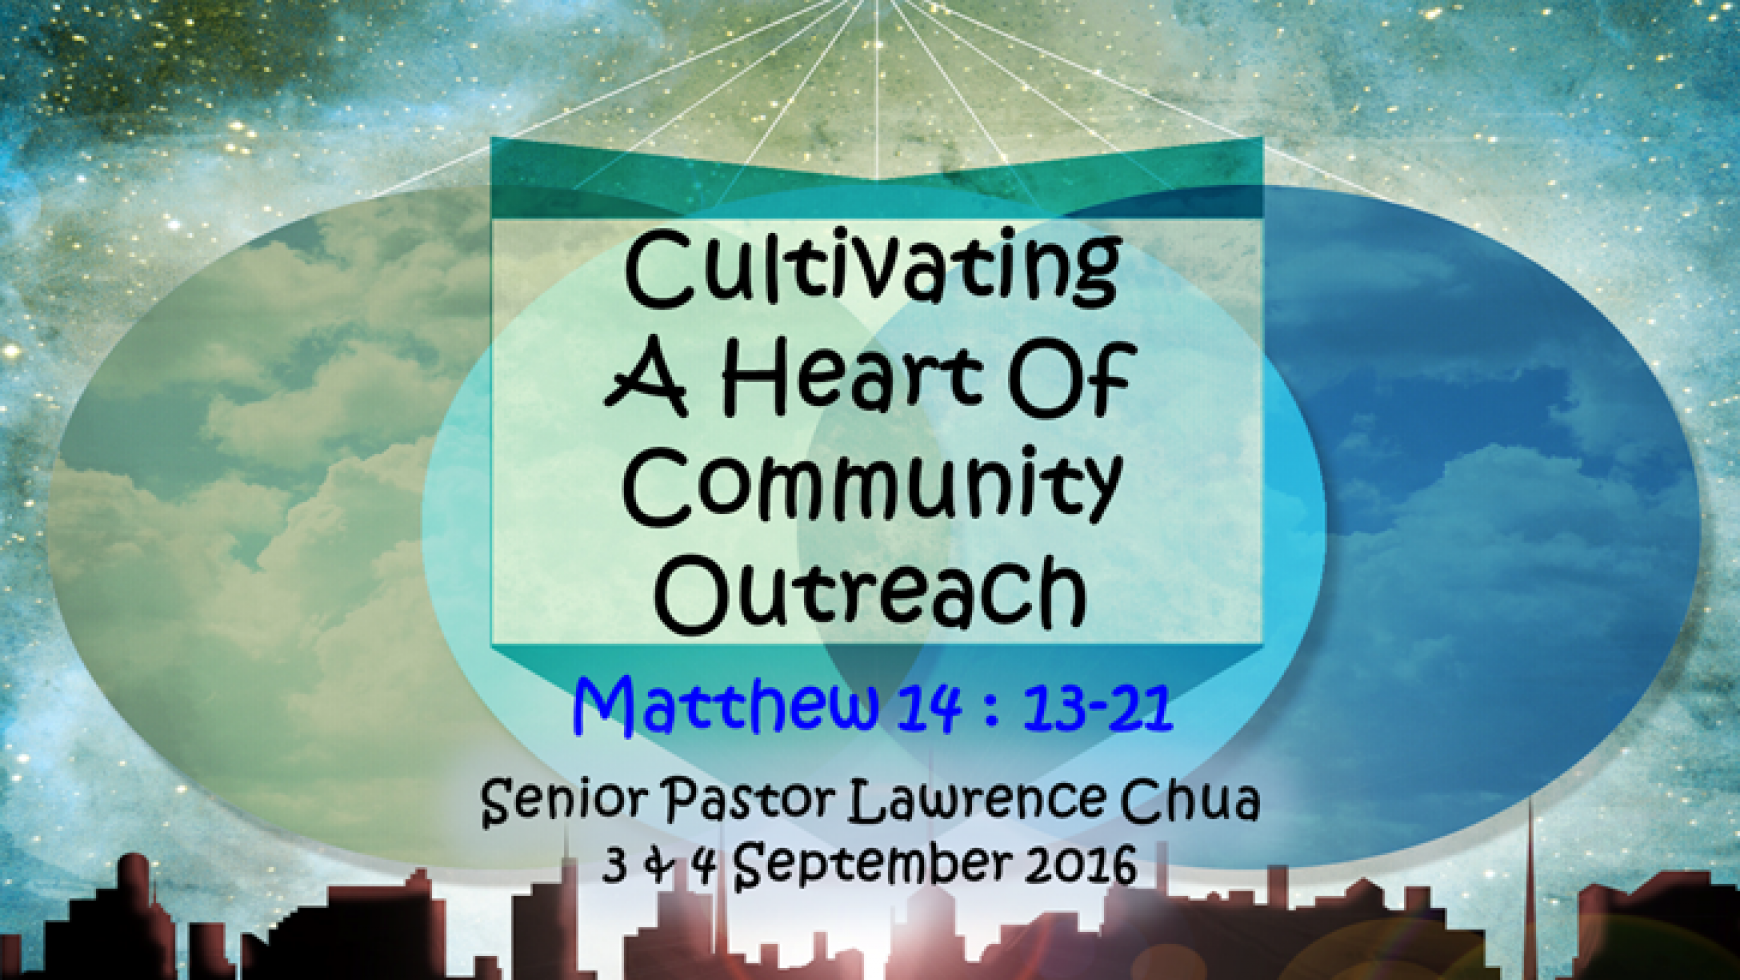 Cultivating a Heart of Community Outreach